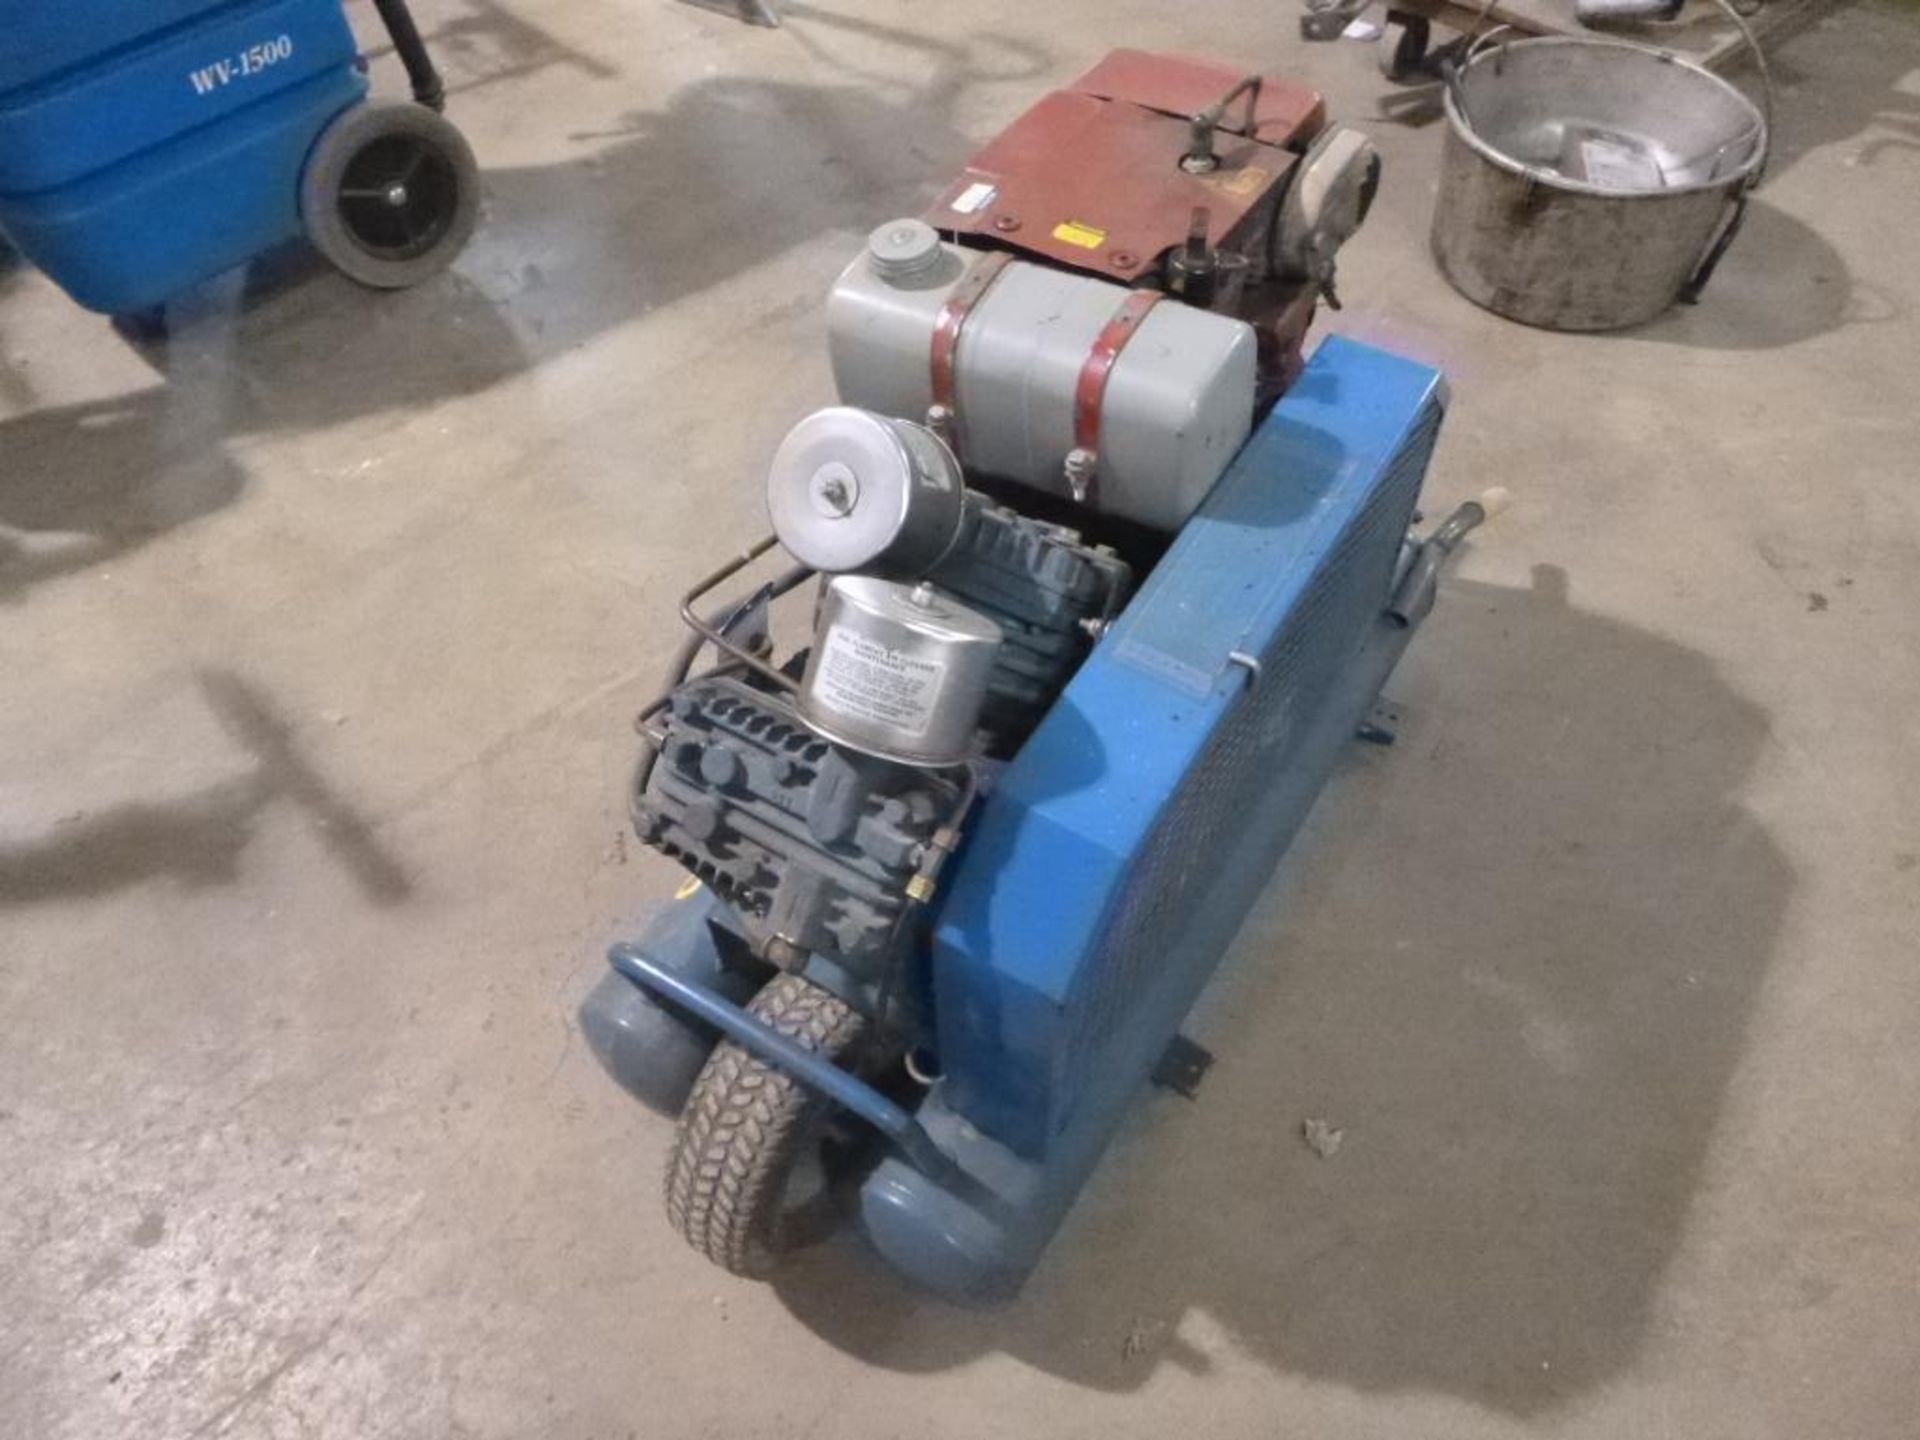 Compressor, Gas 8 HP, Emglo, S/N 62084208, Twin Tank - Image 7 of 10